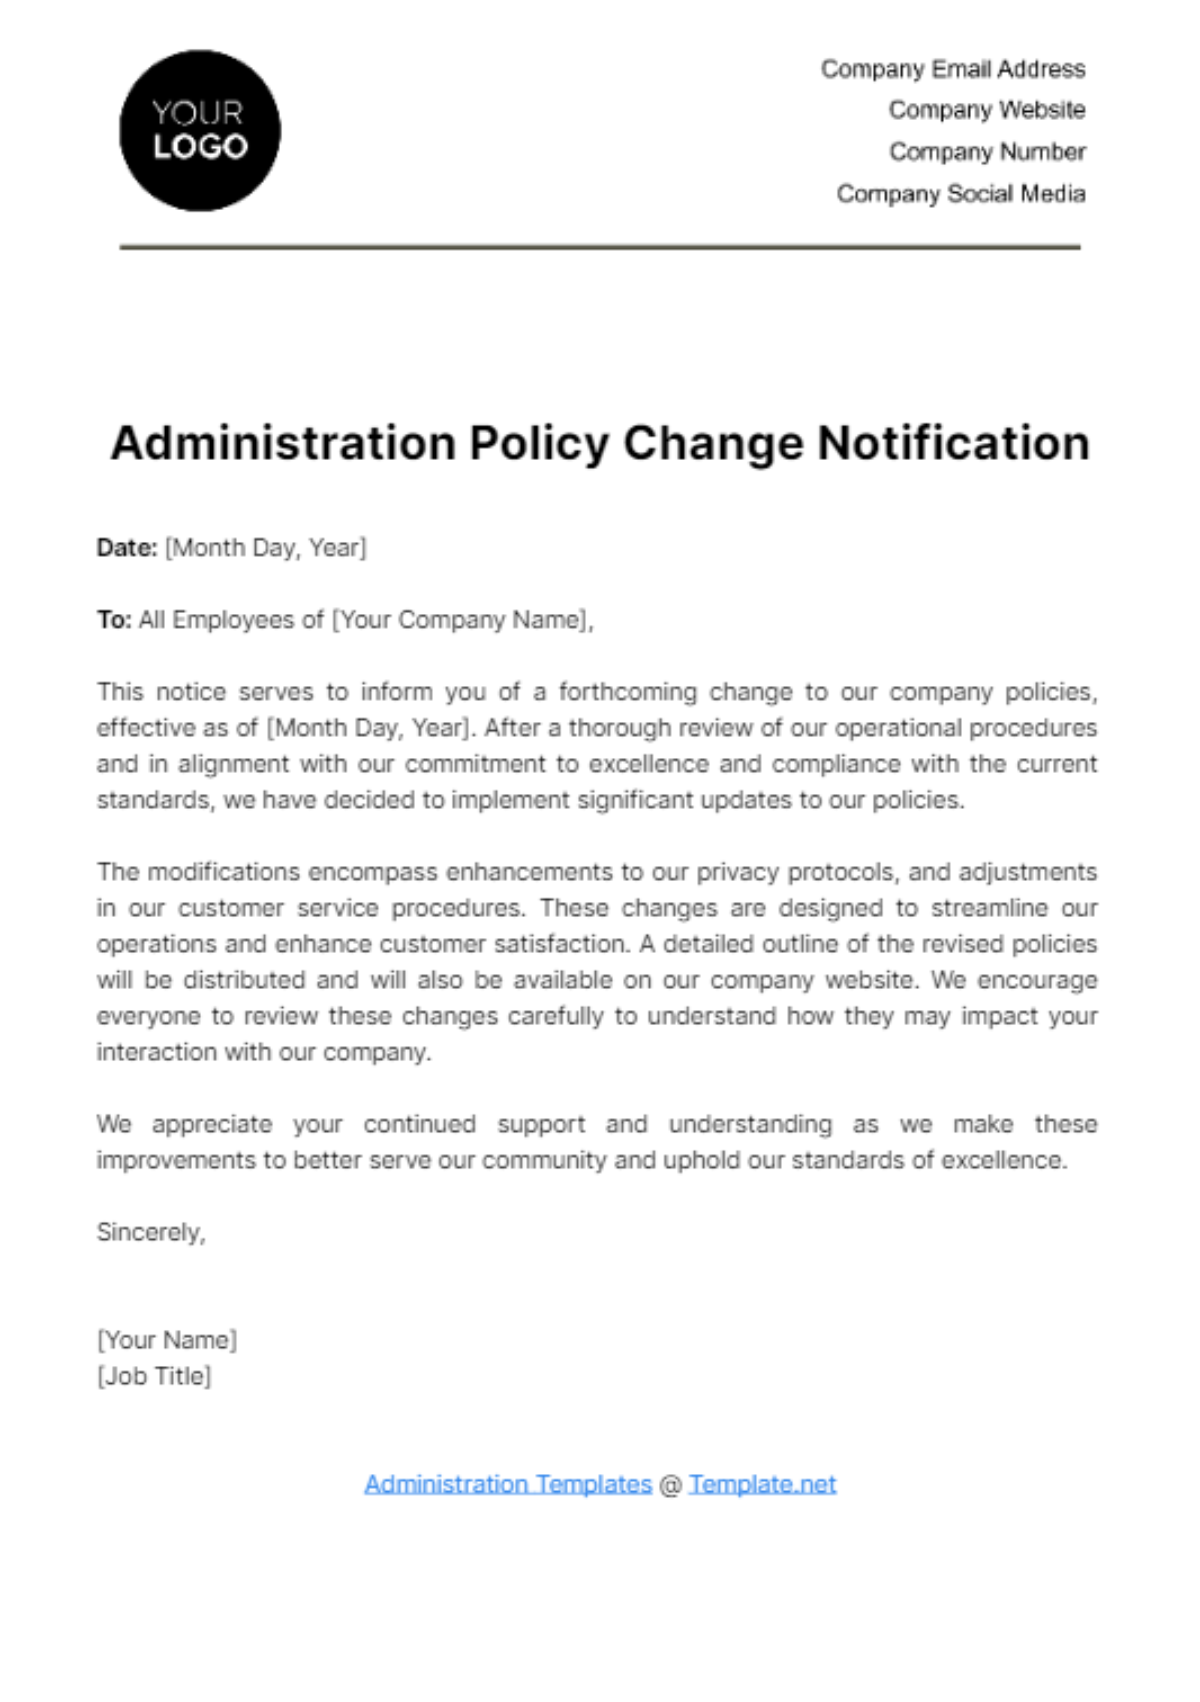 Administration Policy Change Notification Template